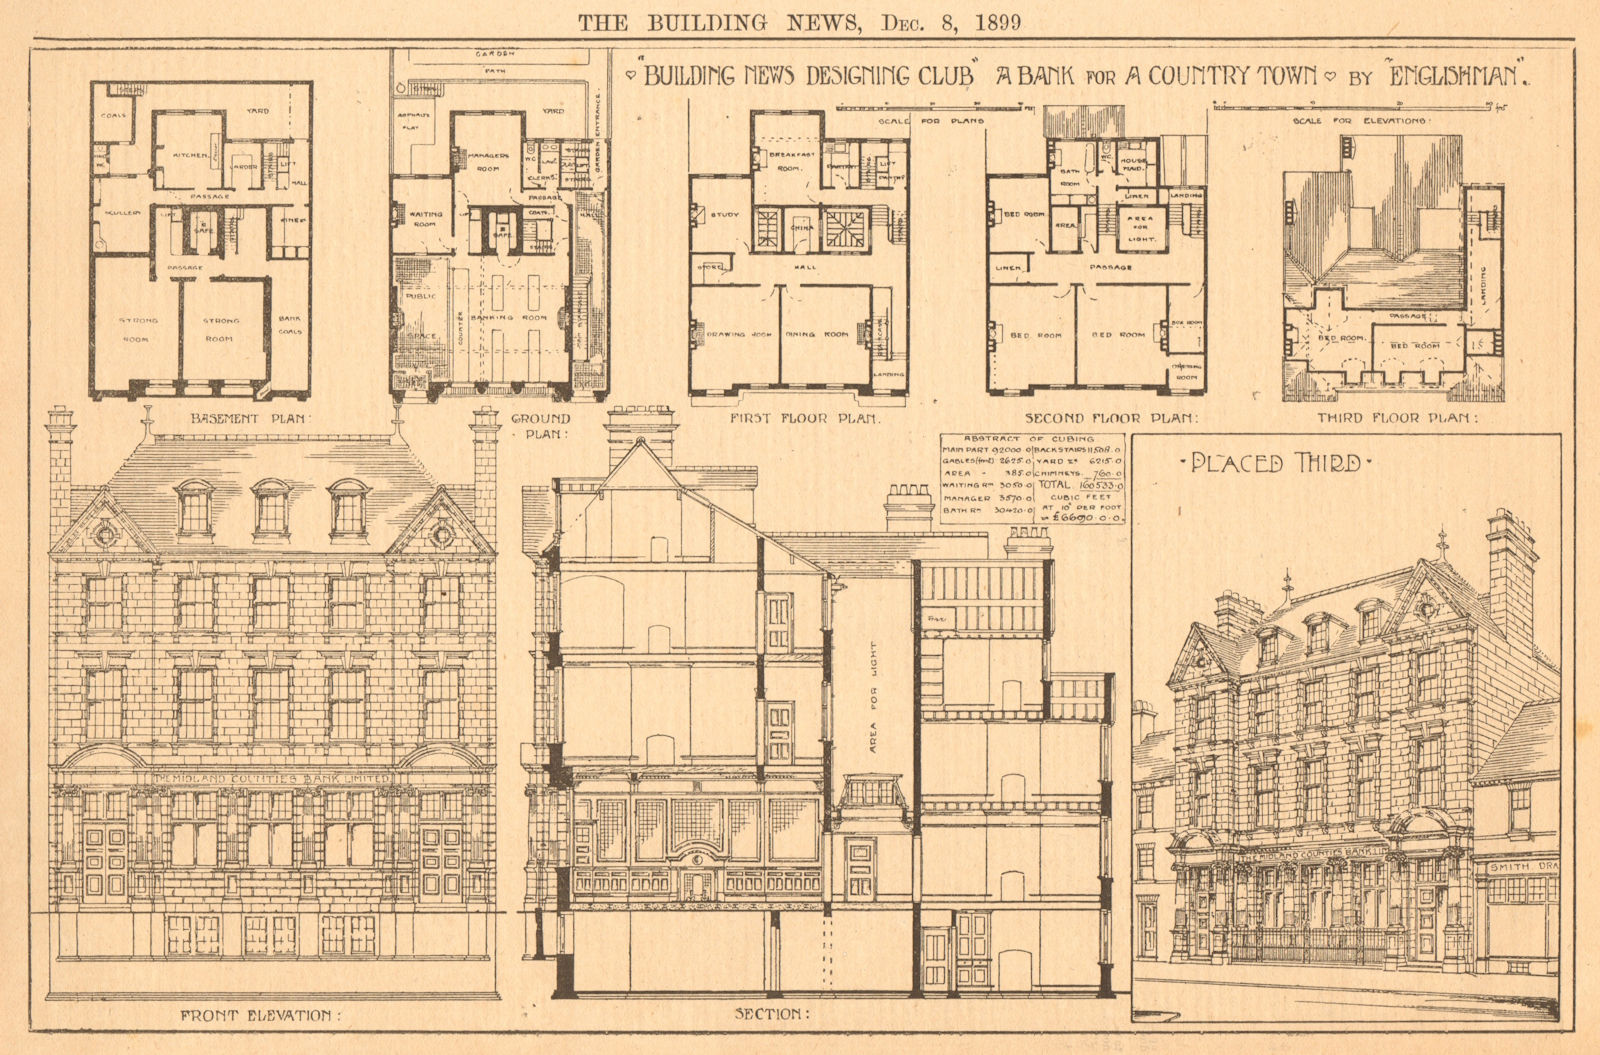 A bank for a country town by "Englishman". Basement plan, elevation 1899 print